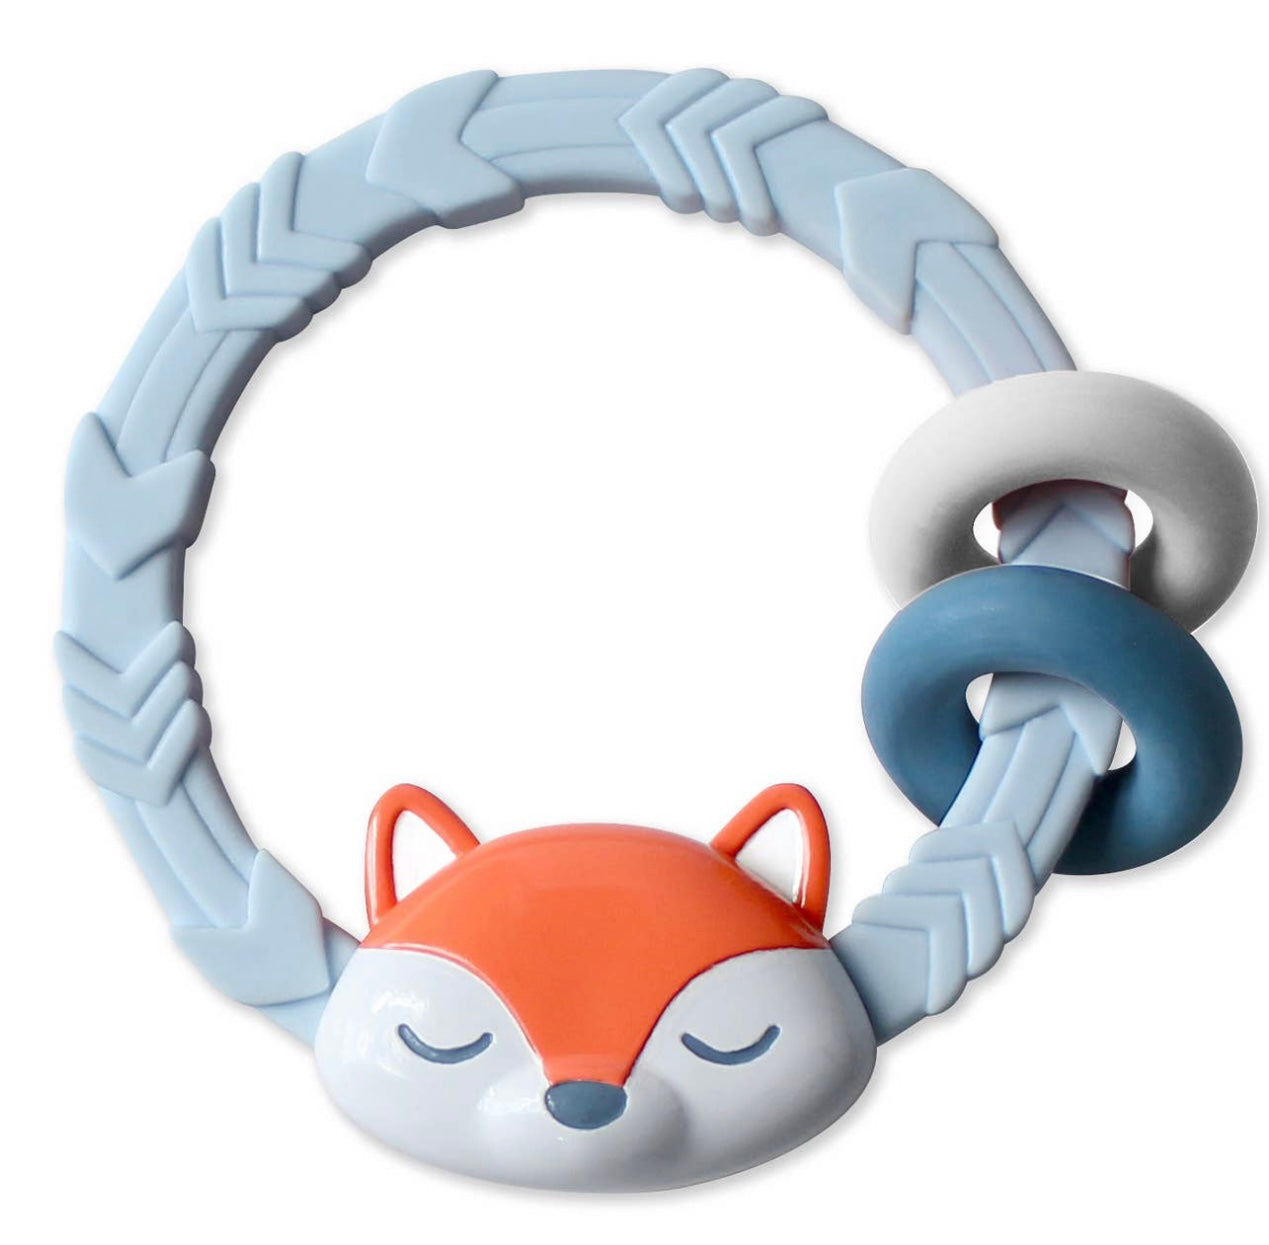 Ritzy Rattle Silicone Teether Rattle (5 colors)